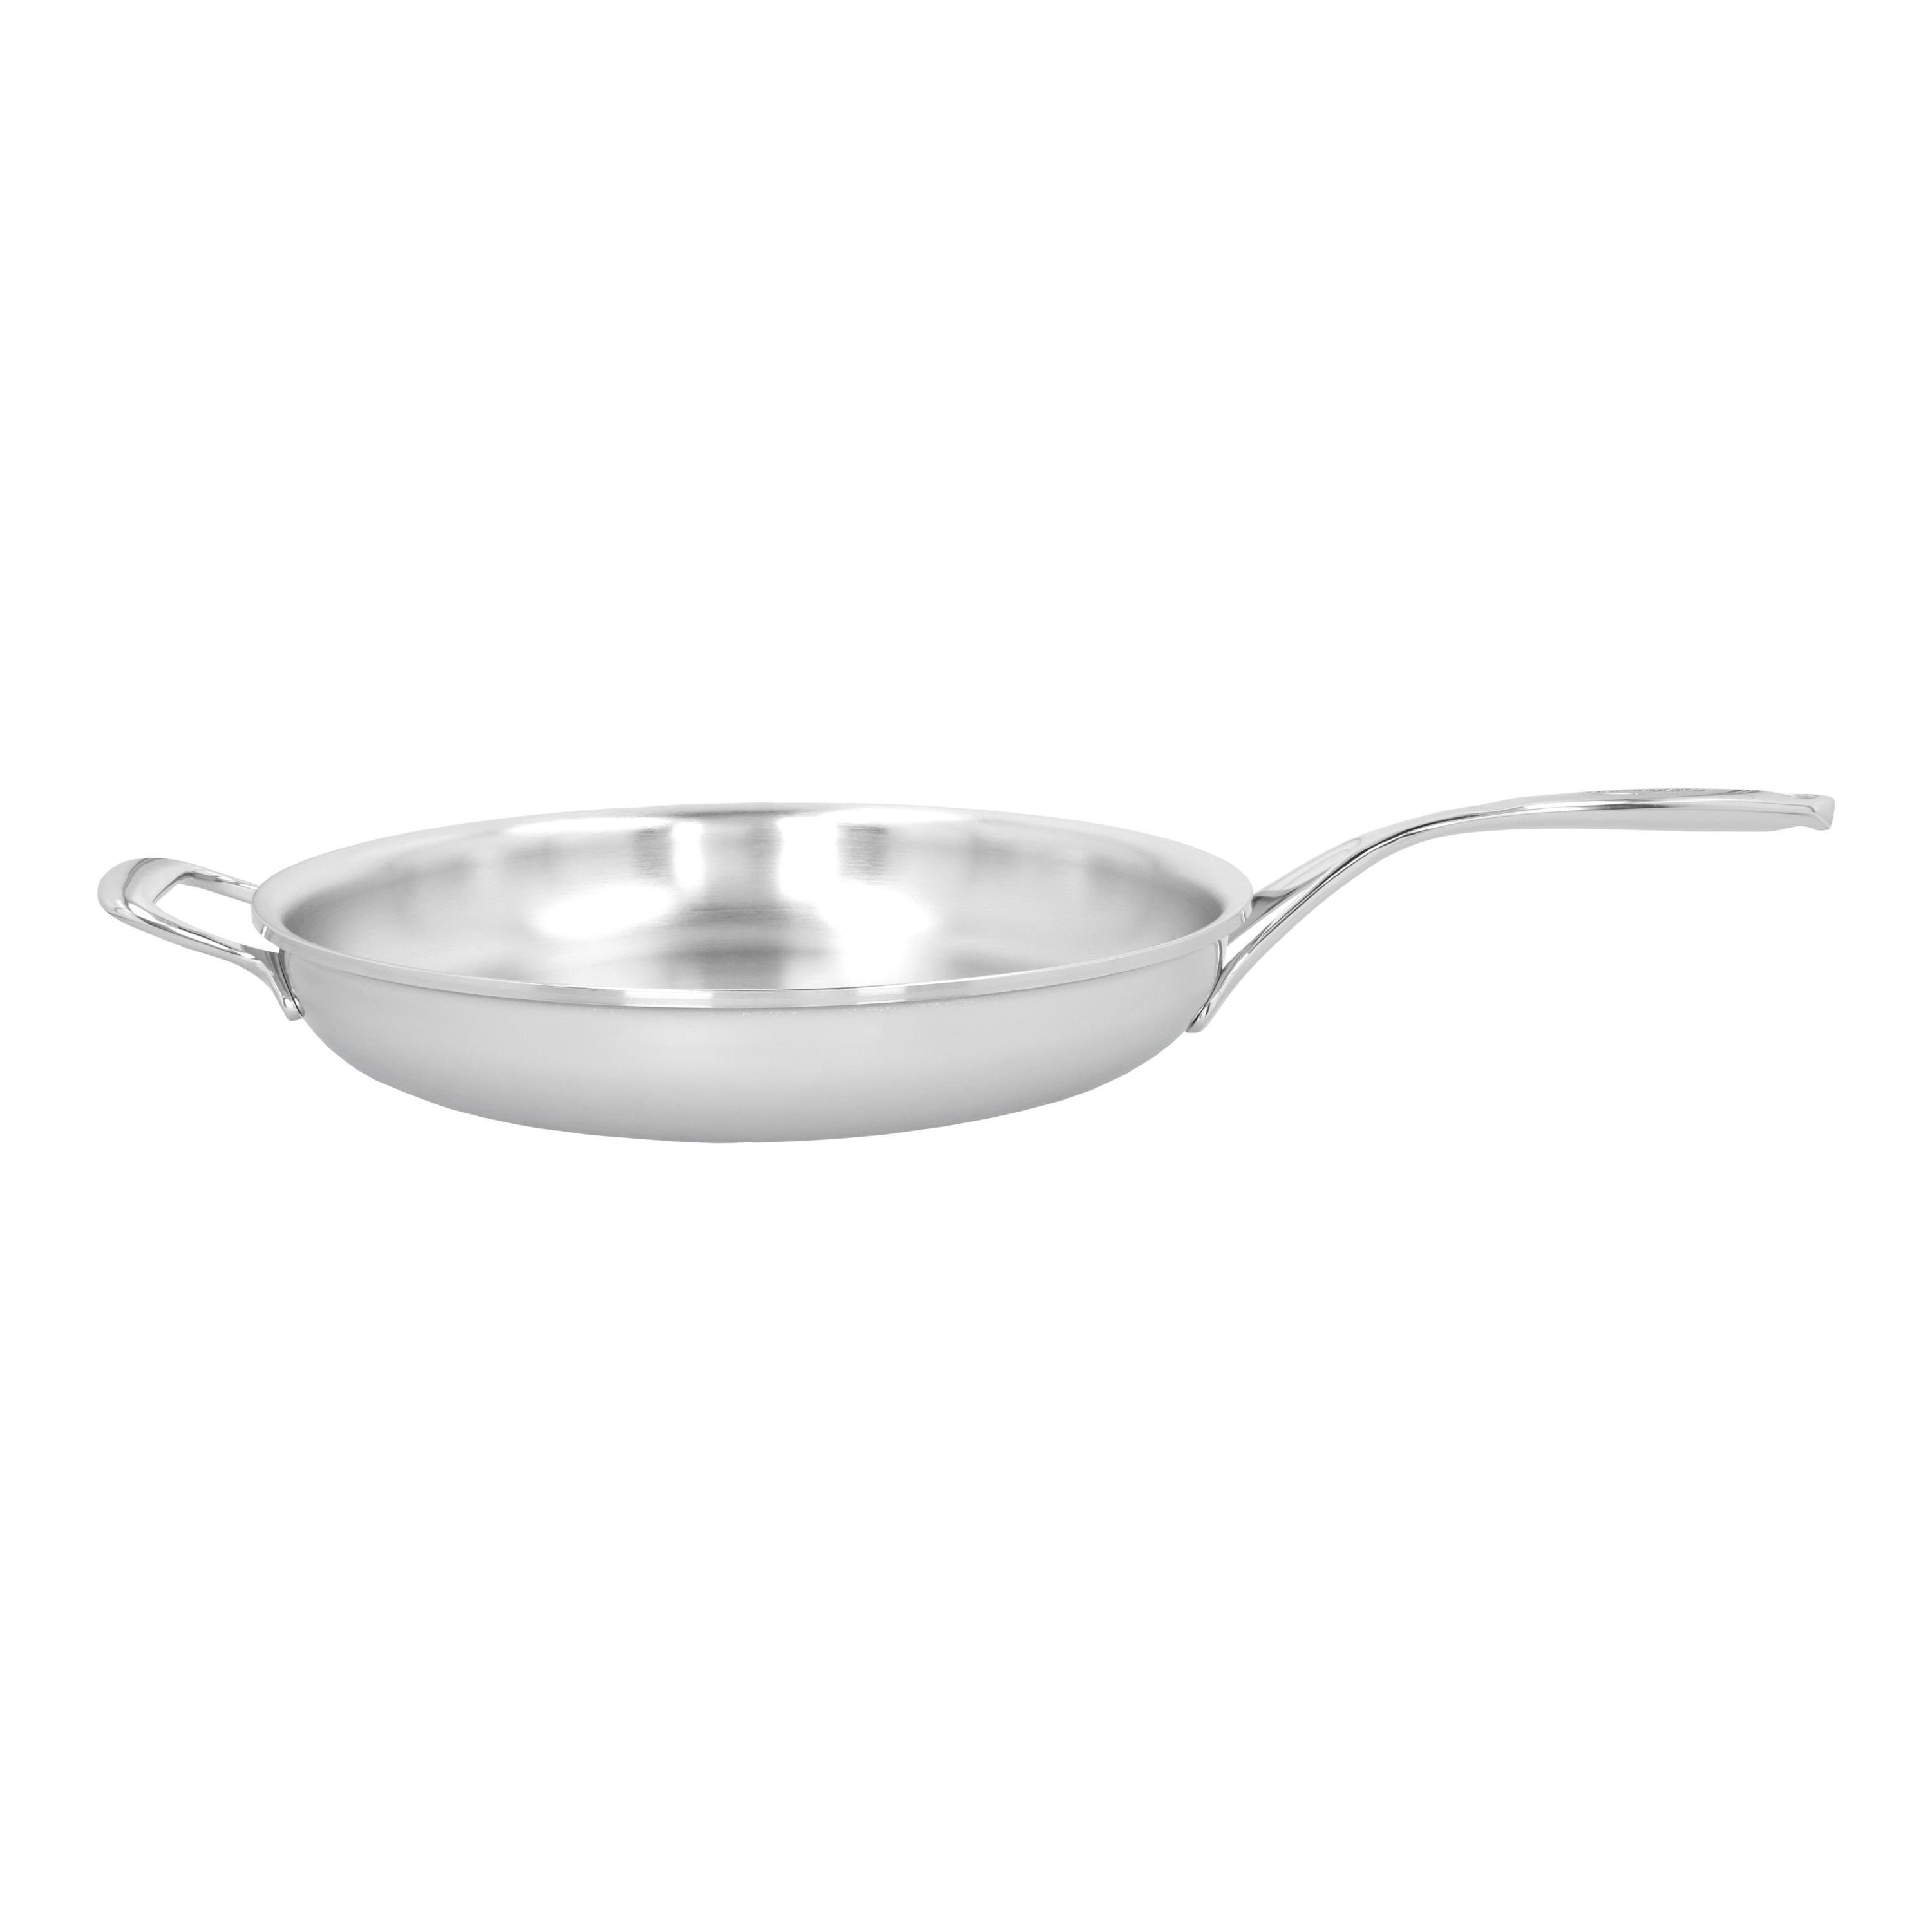 Vollrath French Style Carbon Steel Fry Pan - 12.5